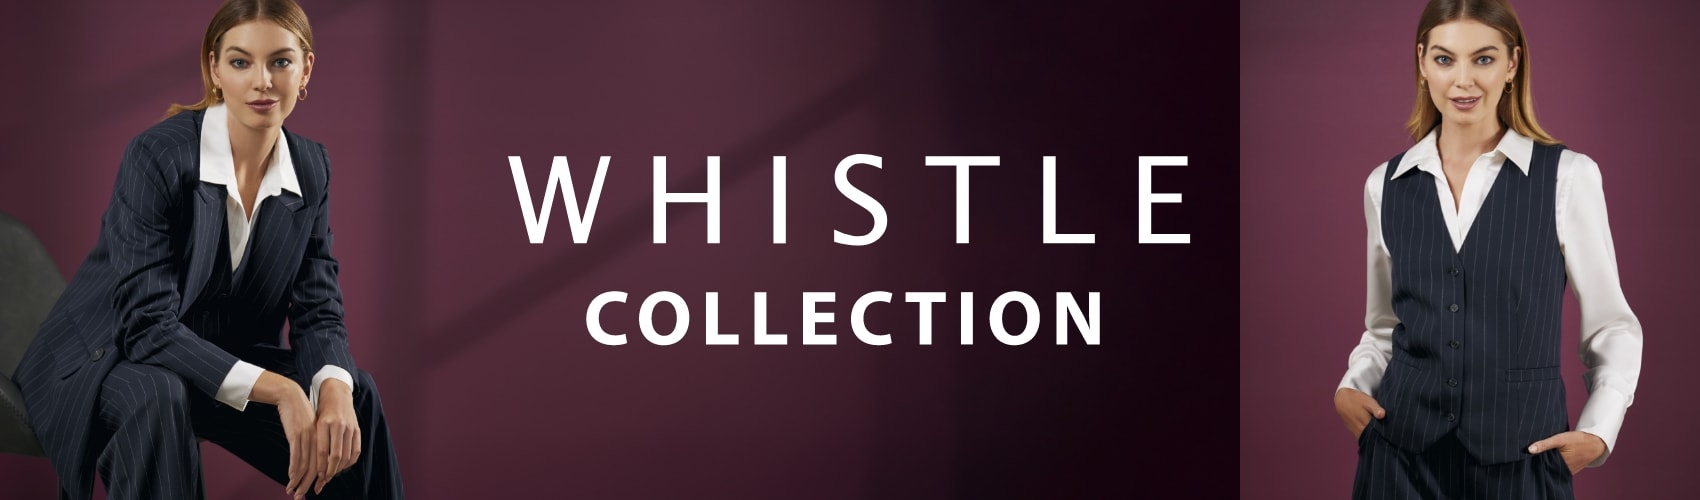 Whistle Collection